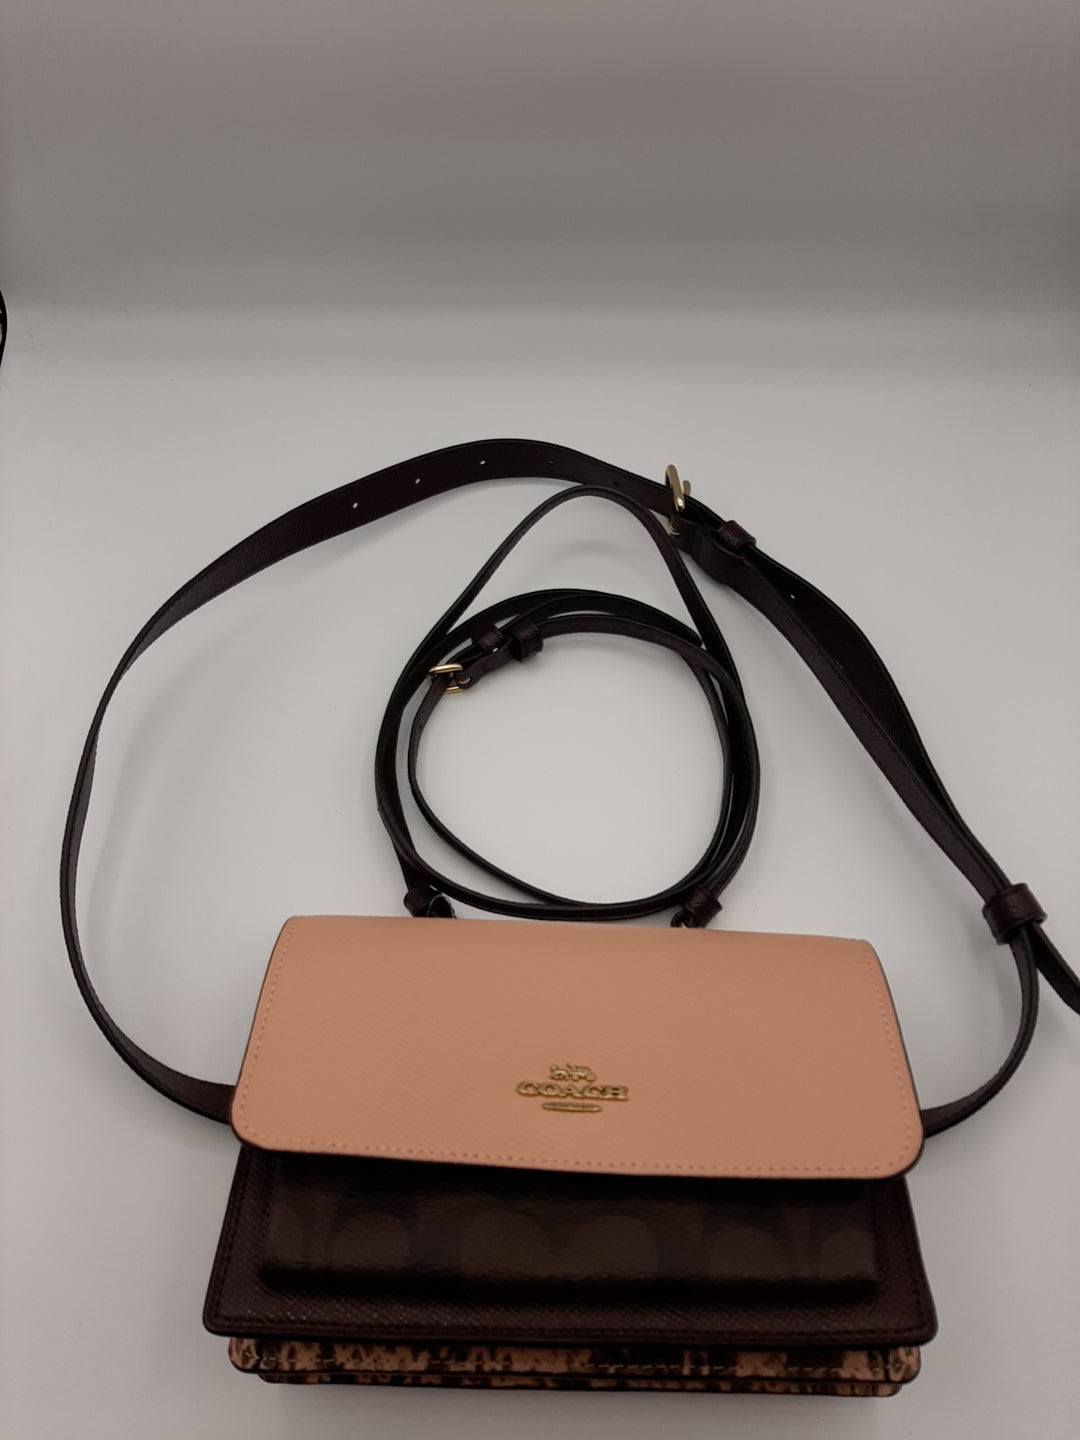 Coach Belt Bag/ Fanny Pack Black - $247 - From Cely